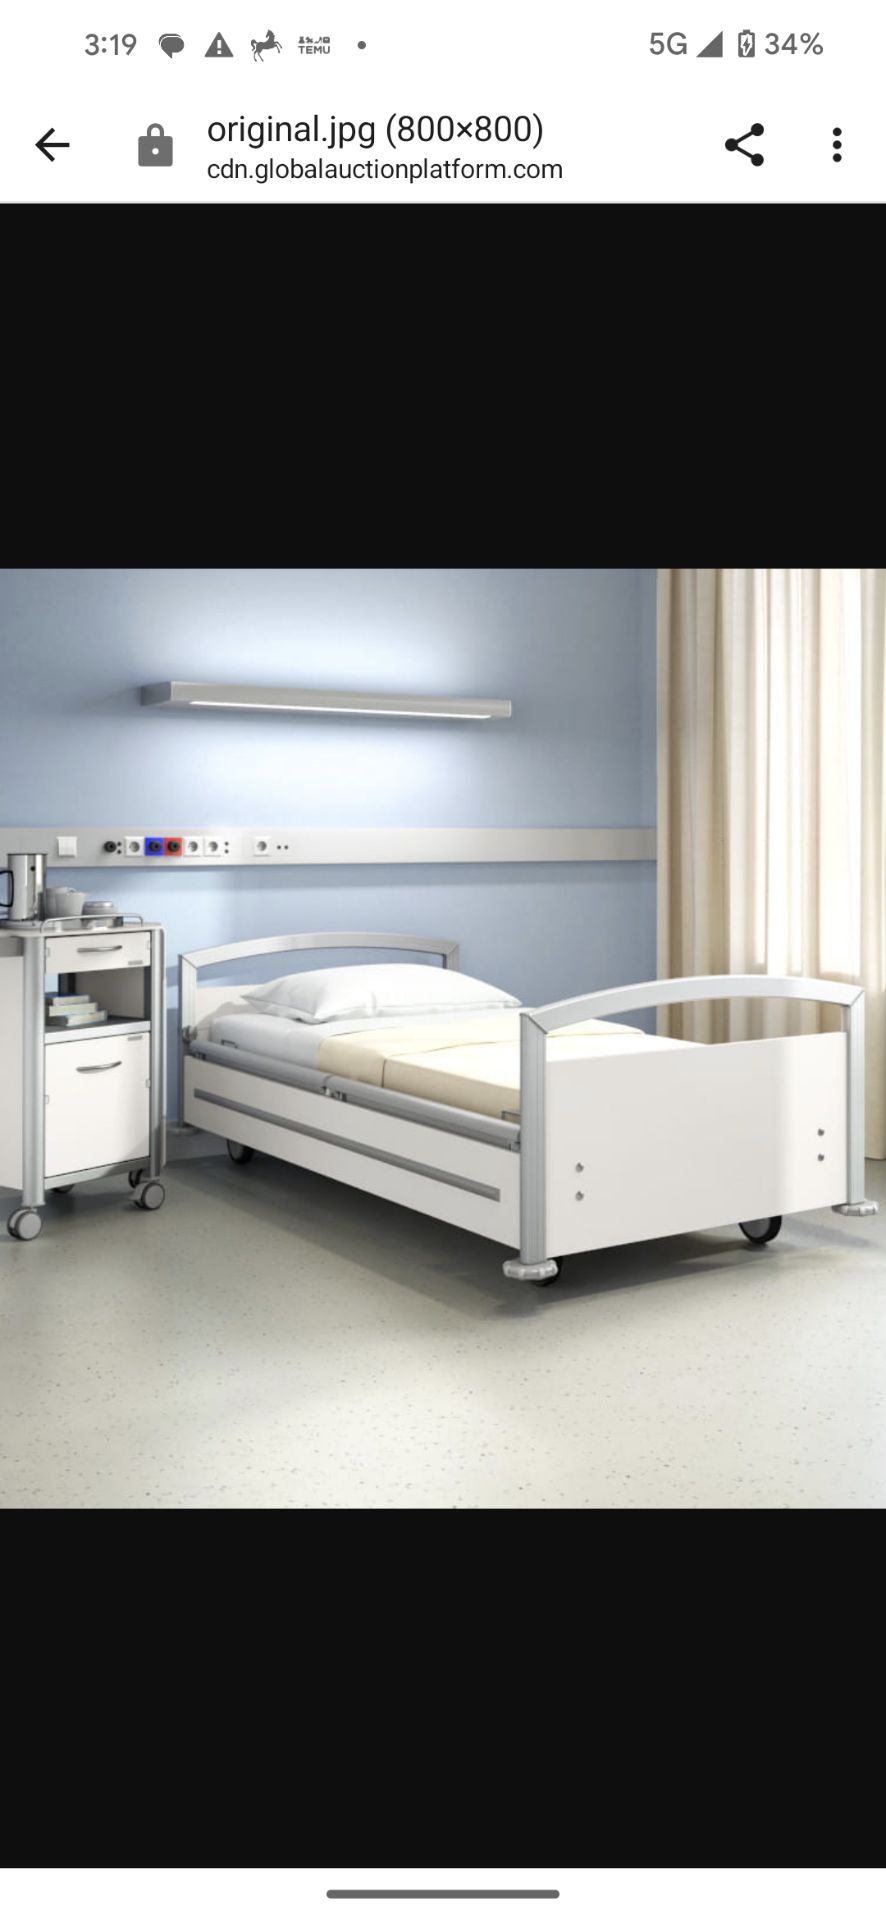 1 x Wissner Bosserhof Sentida 6 Fully Electric Hospital Bed With Mattress - Image 2 of 4